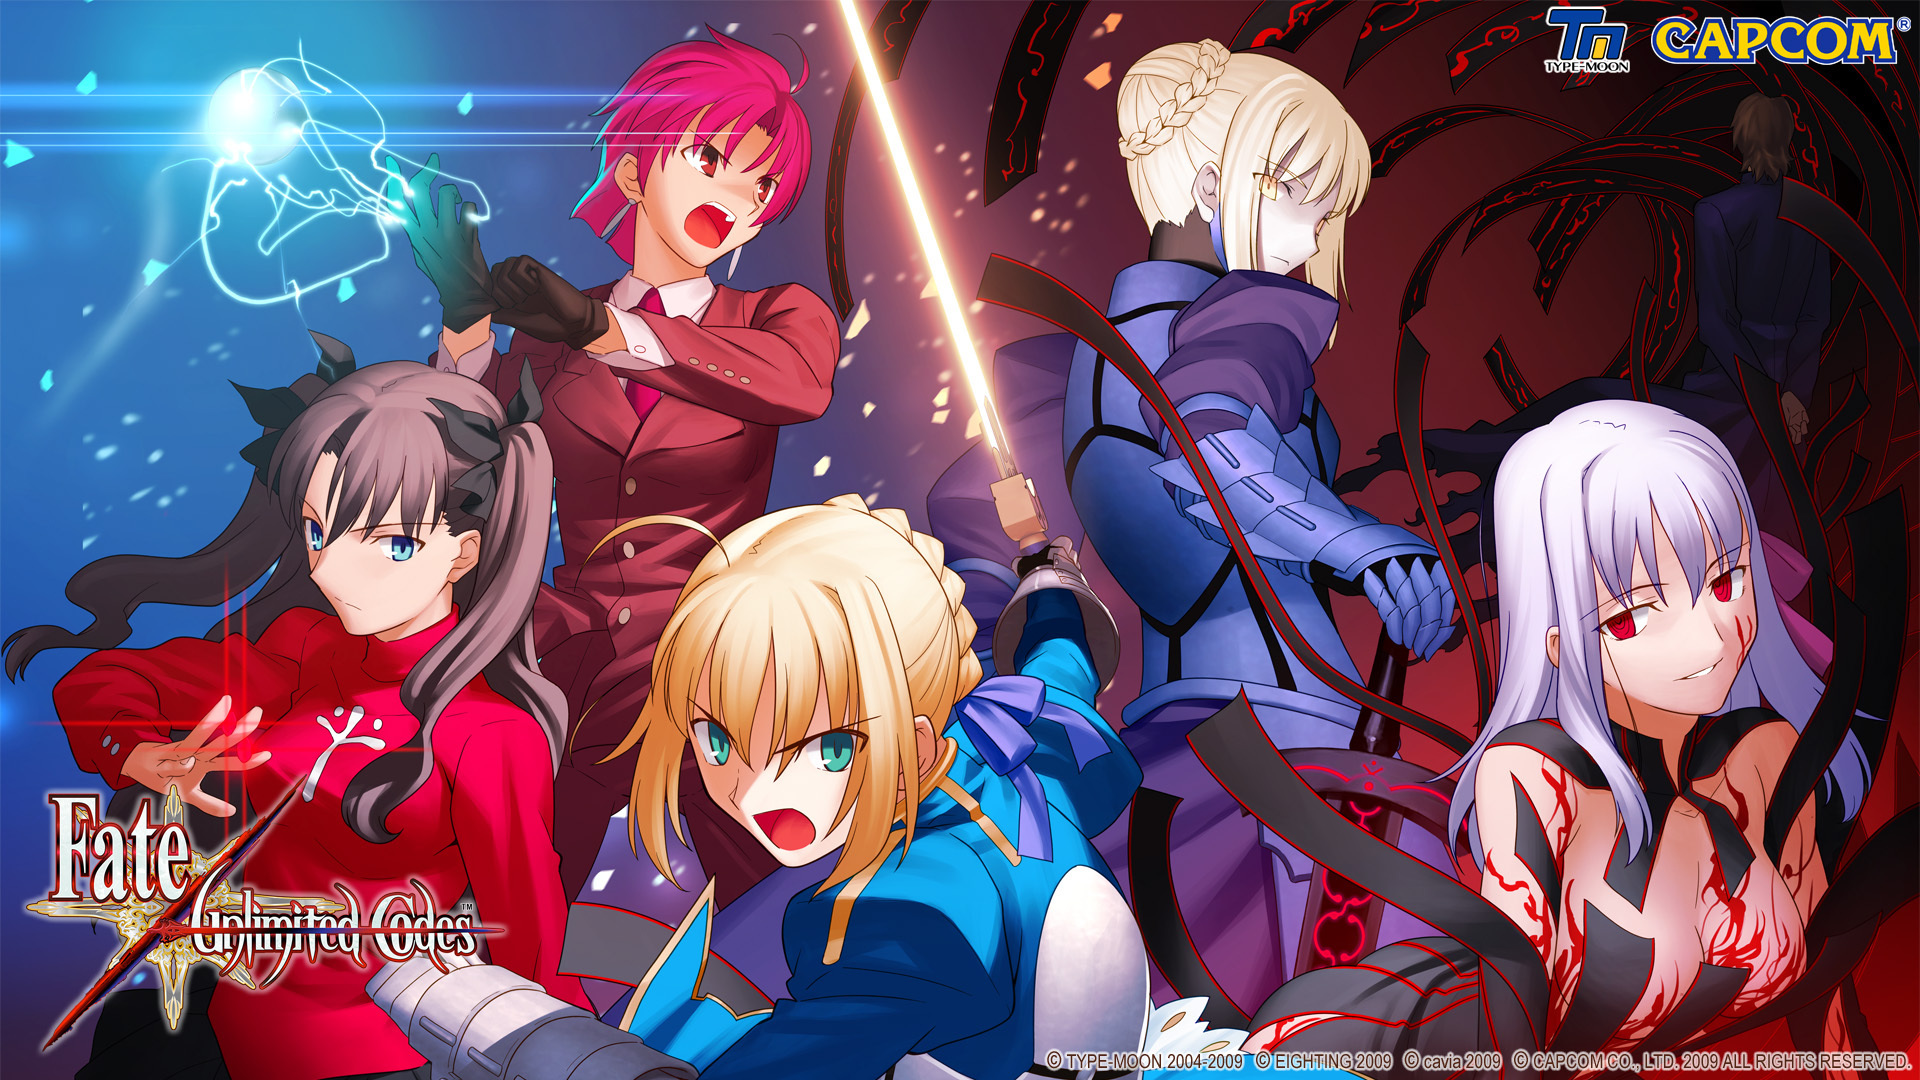 Screens and art   Fate Stay Night Wallpaper 18300285 1920x1080